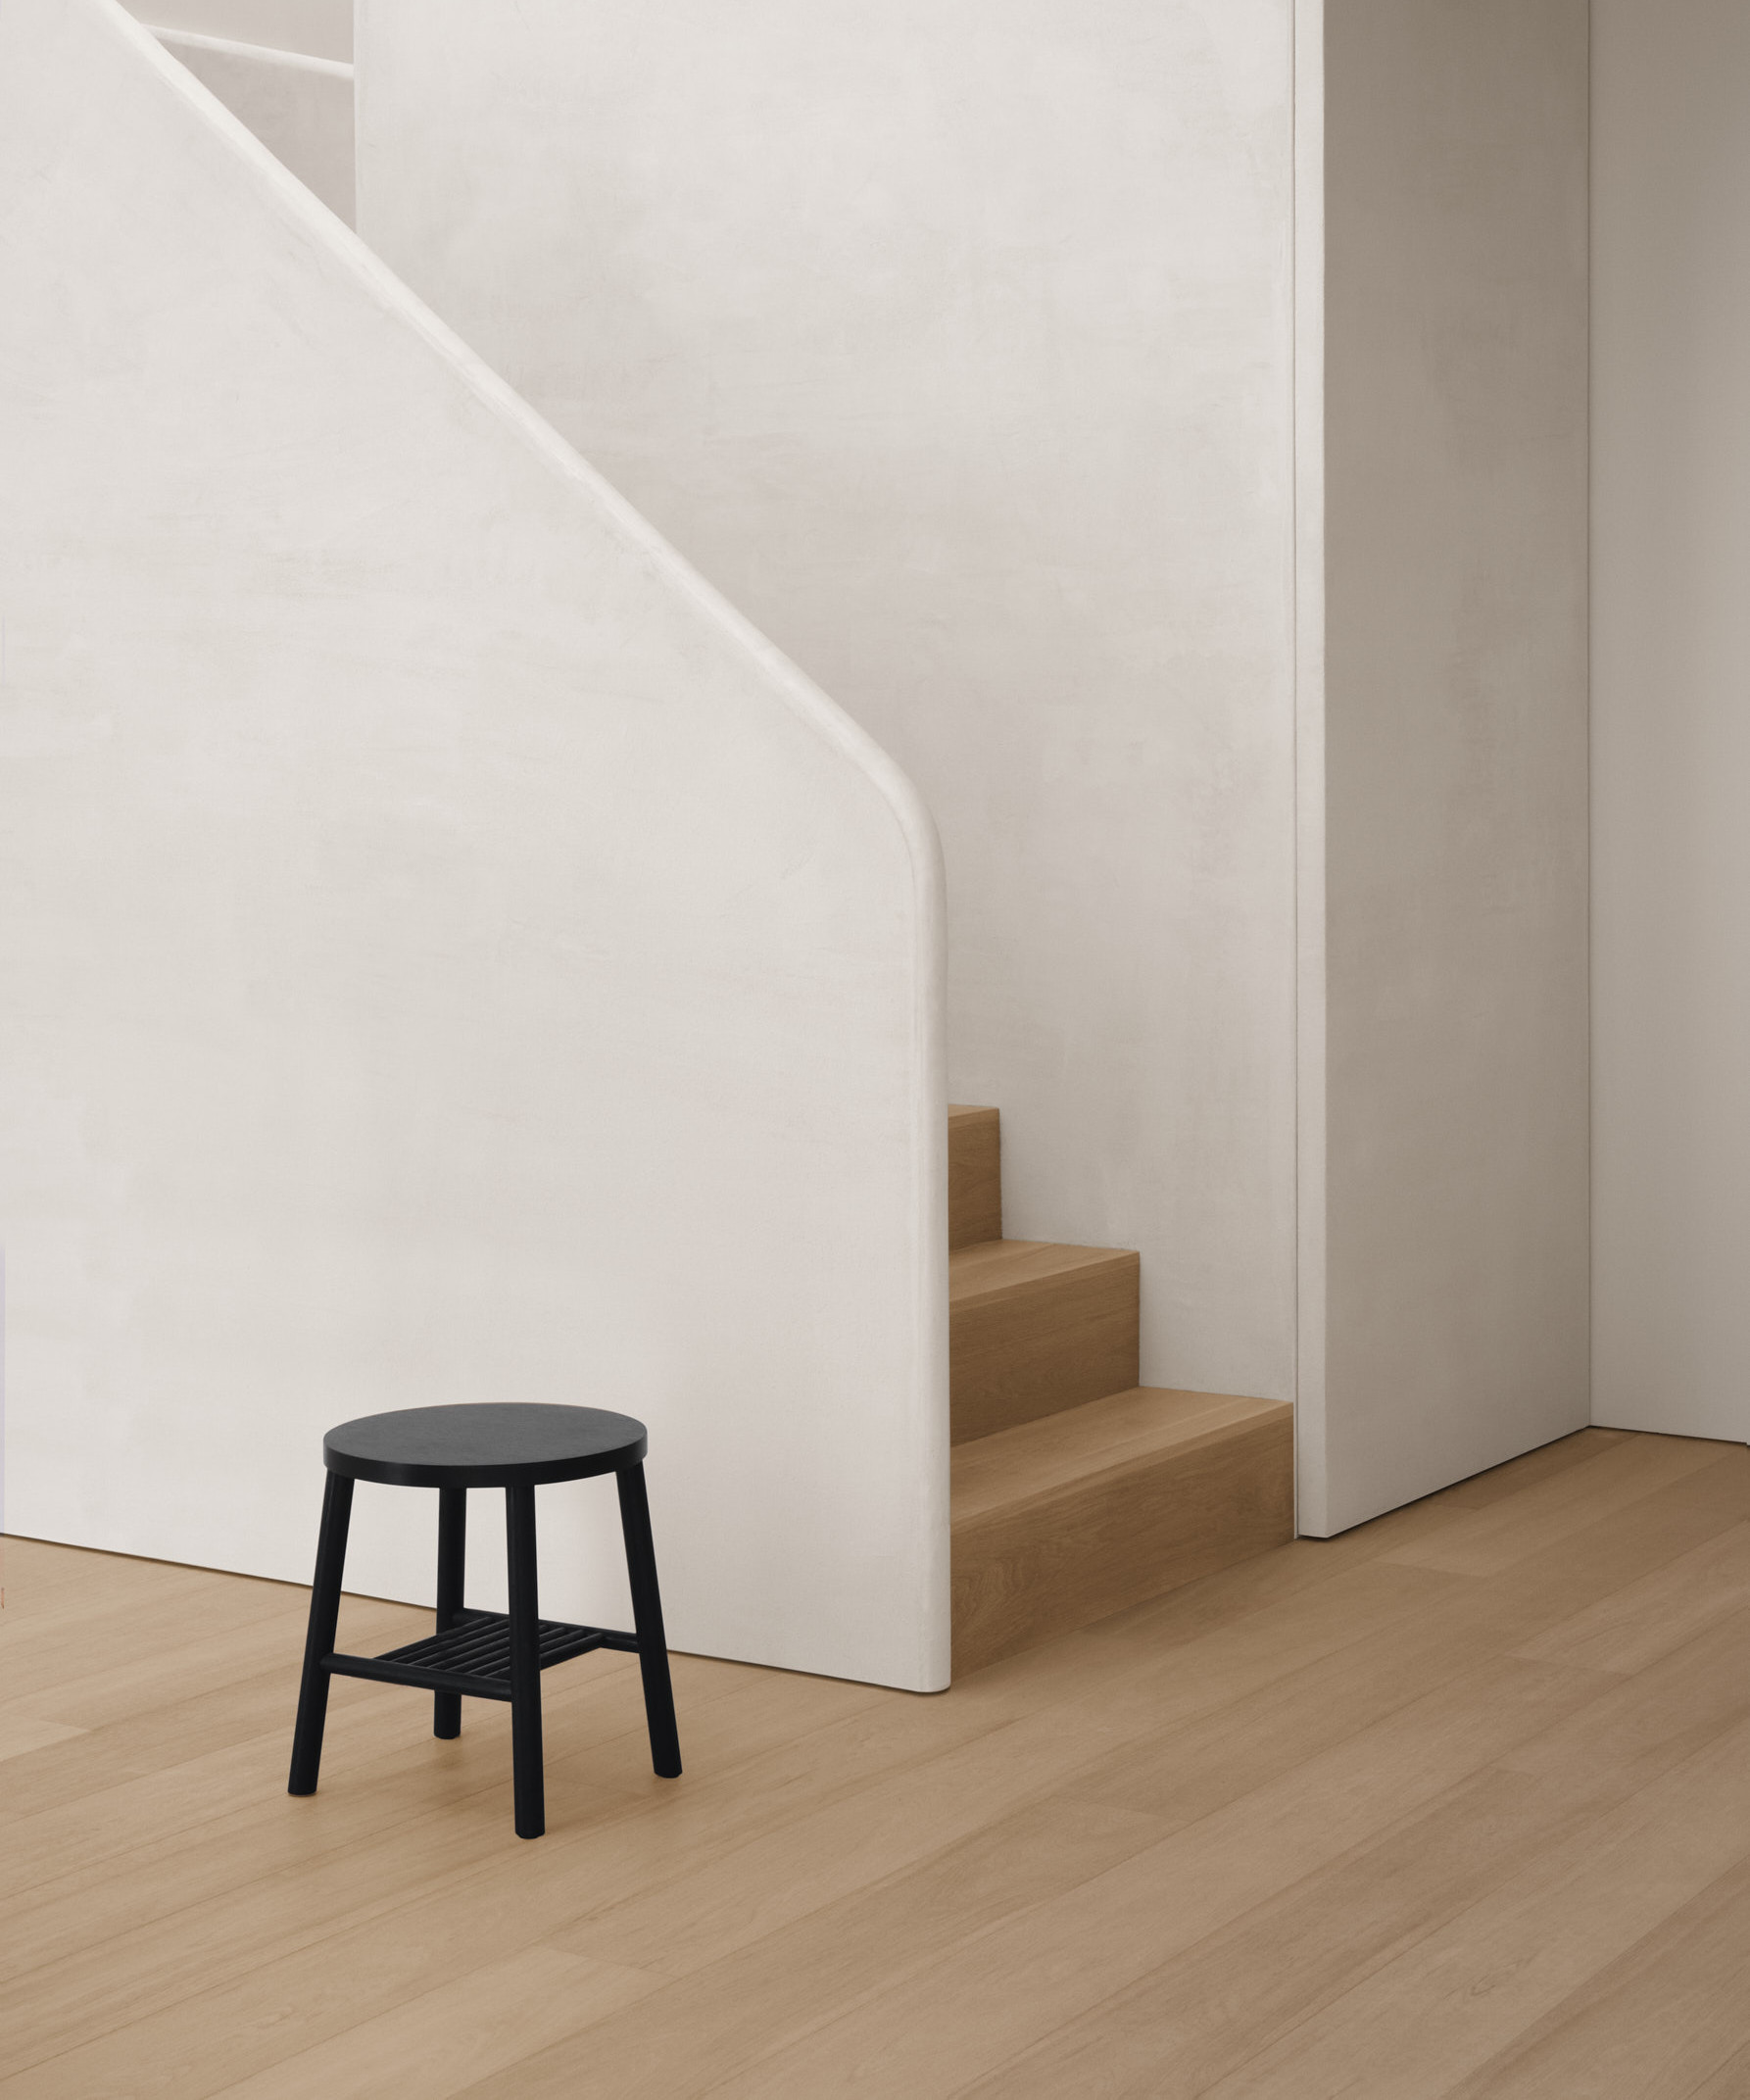 black stool against textured stair case